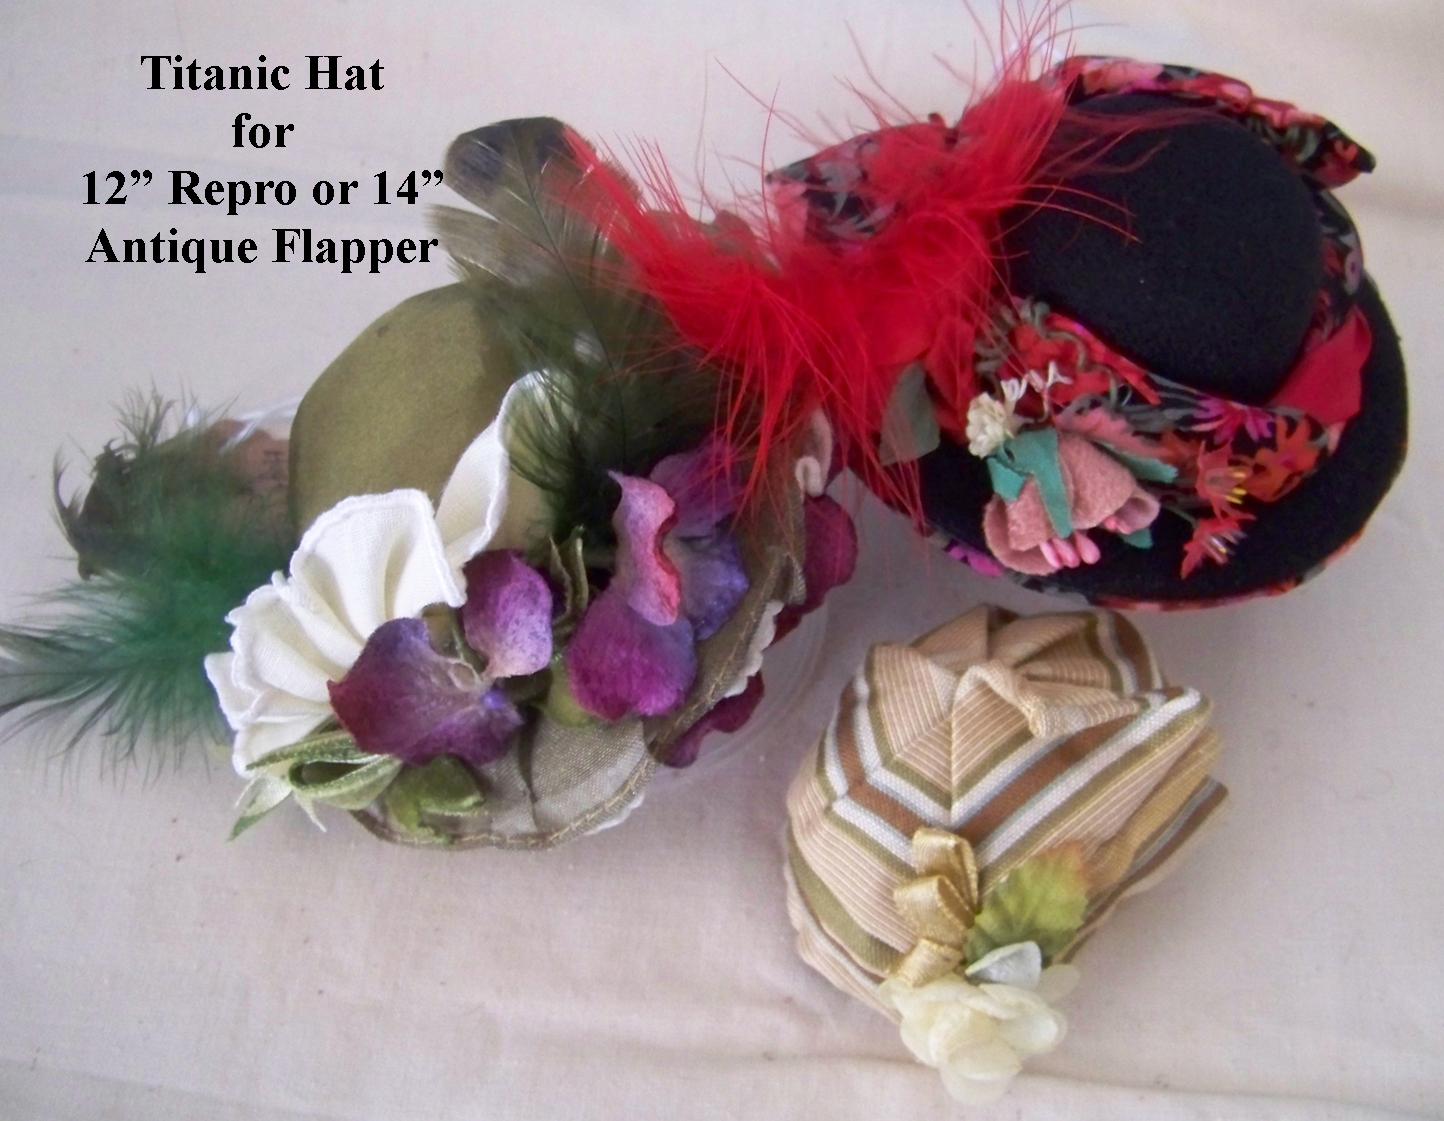 Titanic Hat for 12" Repro or 14" Antique Flapper Doll   •   Saturday, August 6th, 9:00 am